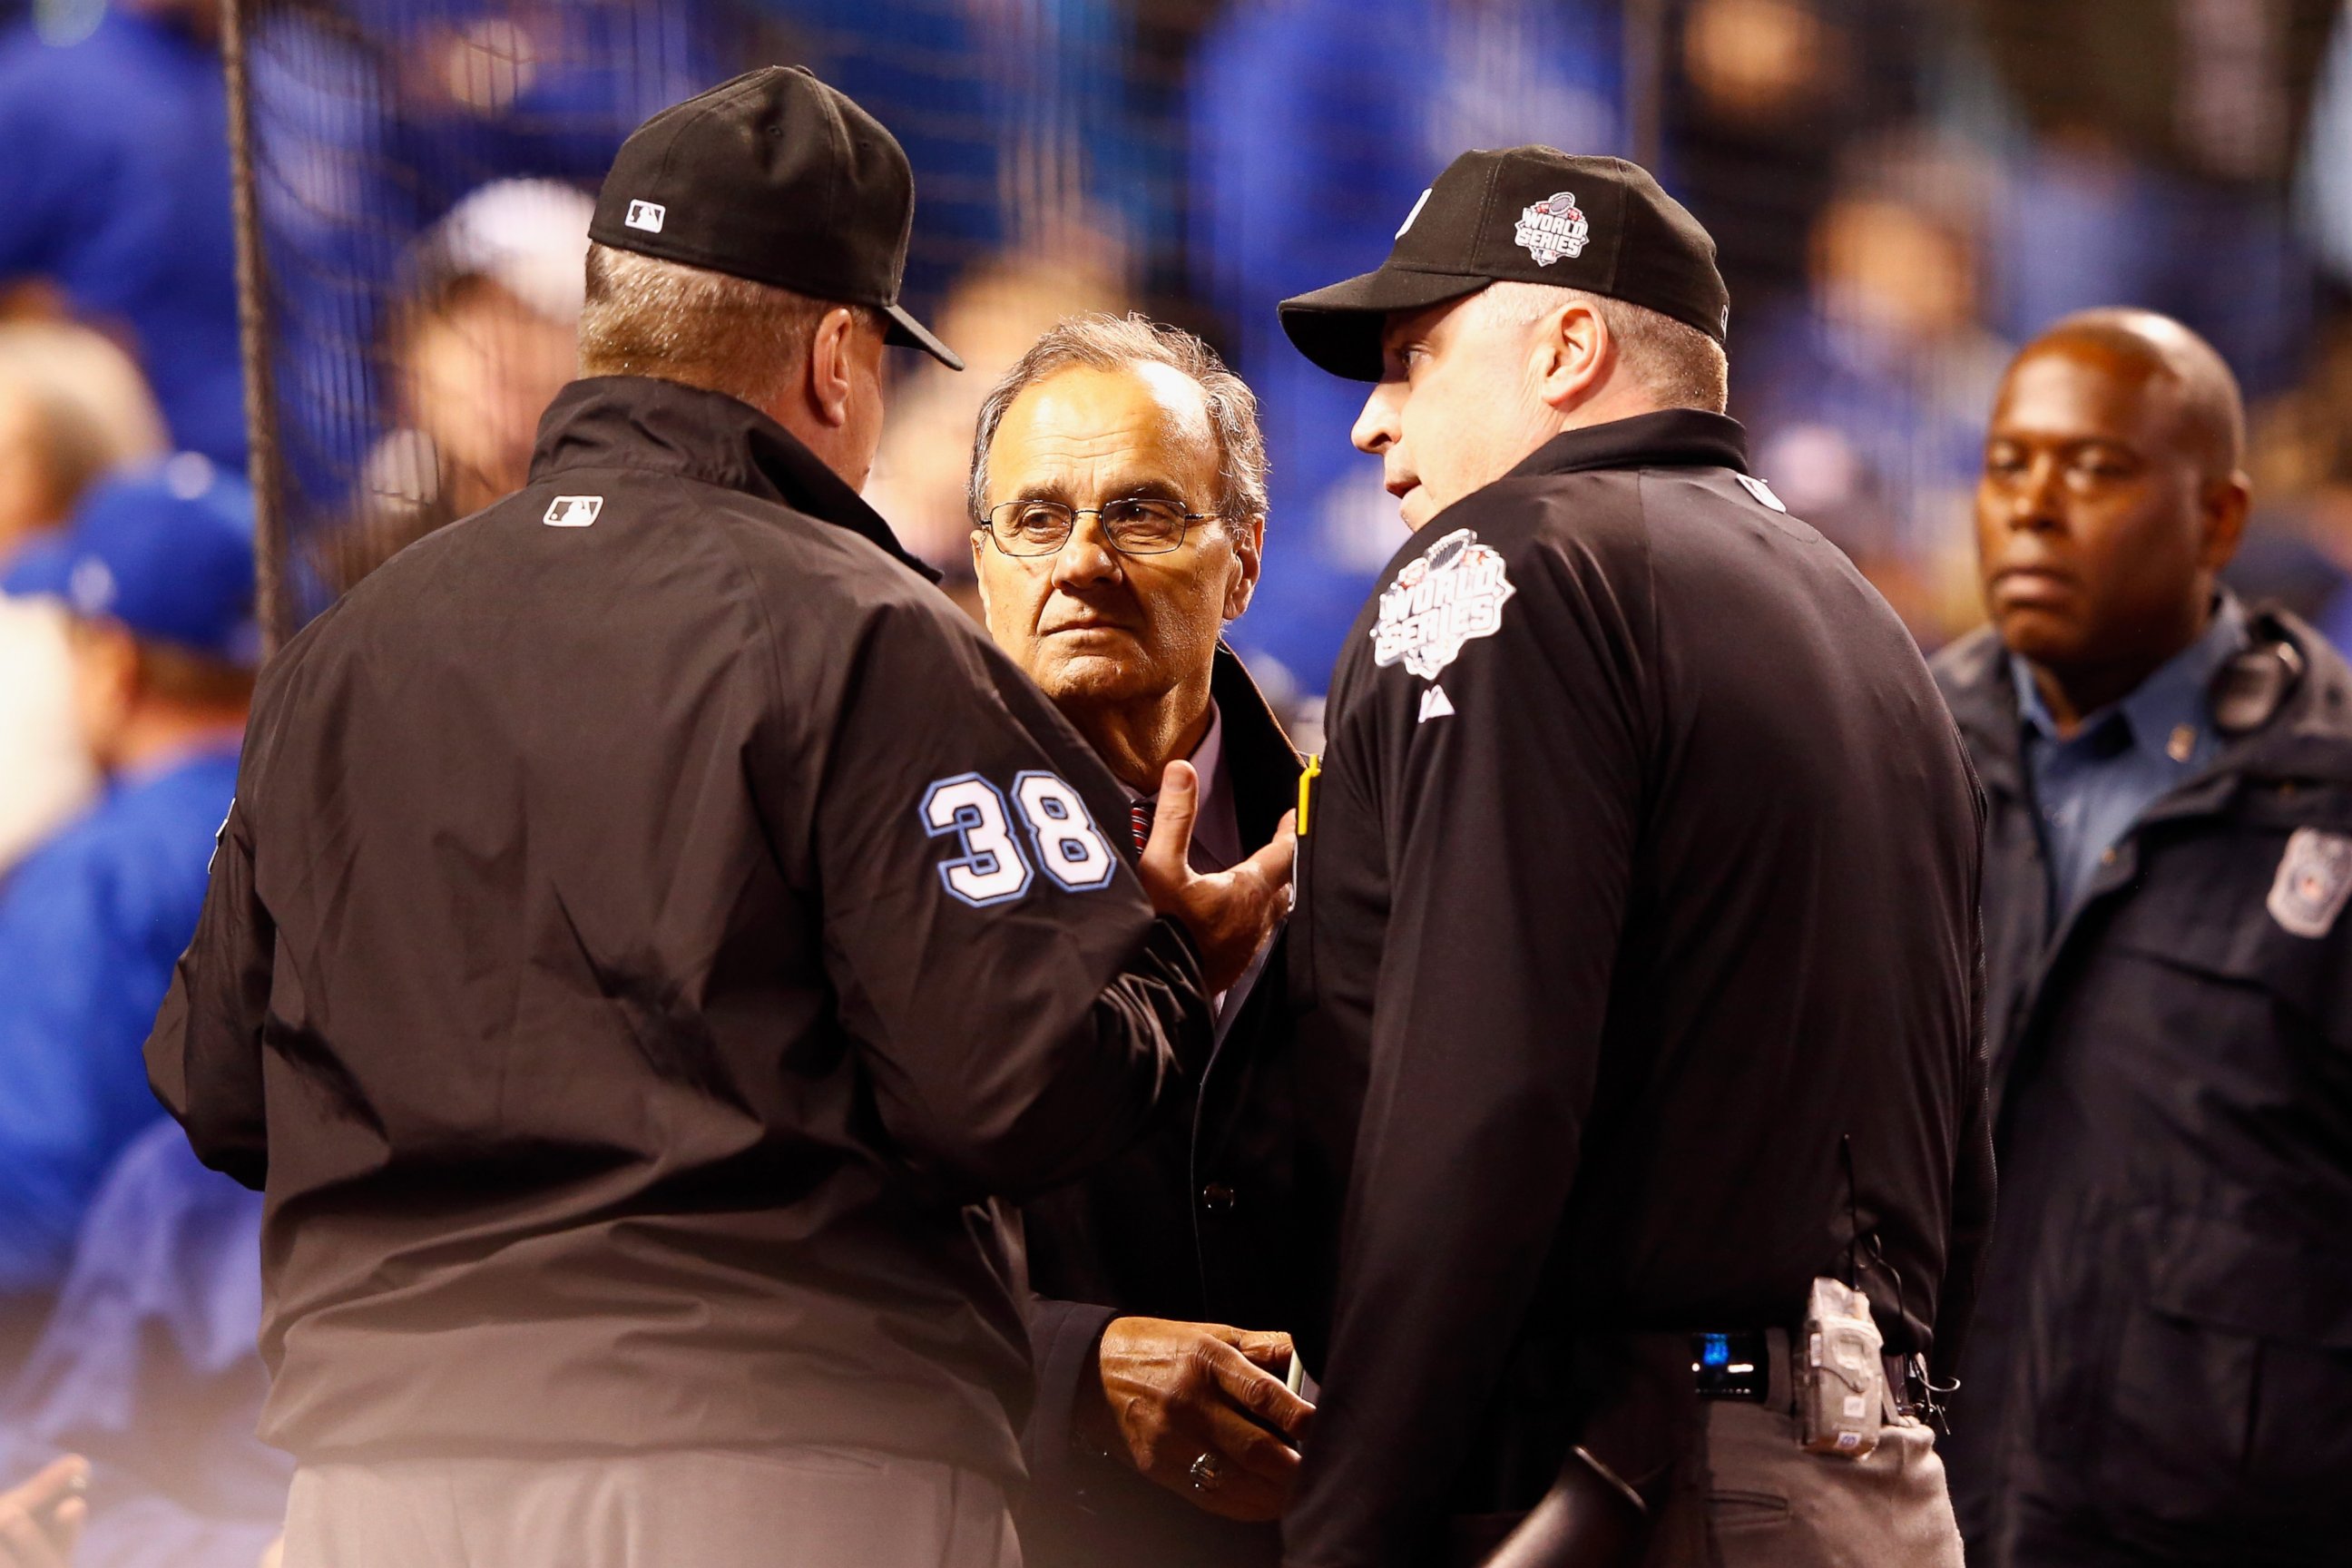 PHOTO:Joe Torre, MLB's Chief Baseball Officer, meets with umpires in the fourth inning to discuss technical difficulties during Game 1 of the 2015 World Series between the Kansas City Royals and the New York Mets, Oct. 27, 2015, in Kansas City, Mo. 